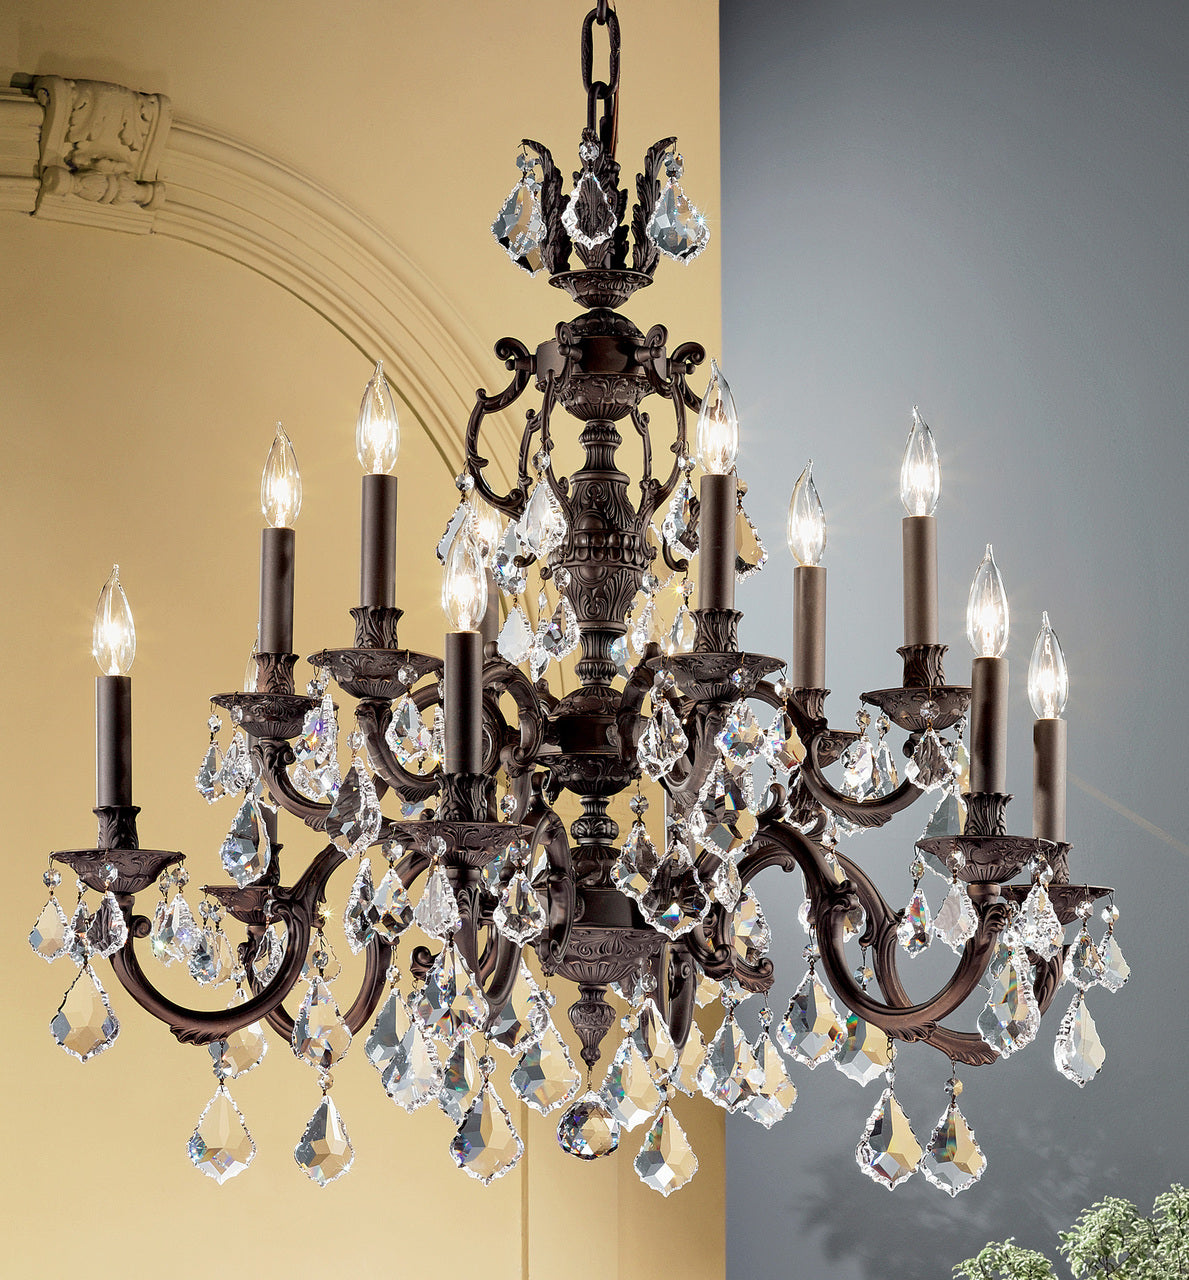 Classic Lighting 57377 FG S Chateau Crystal Chandelier in French Gold (Imported from Spain)